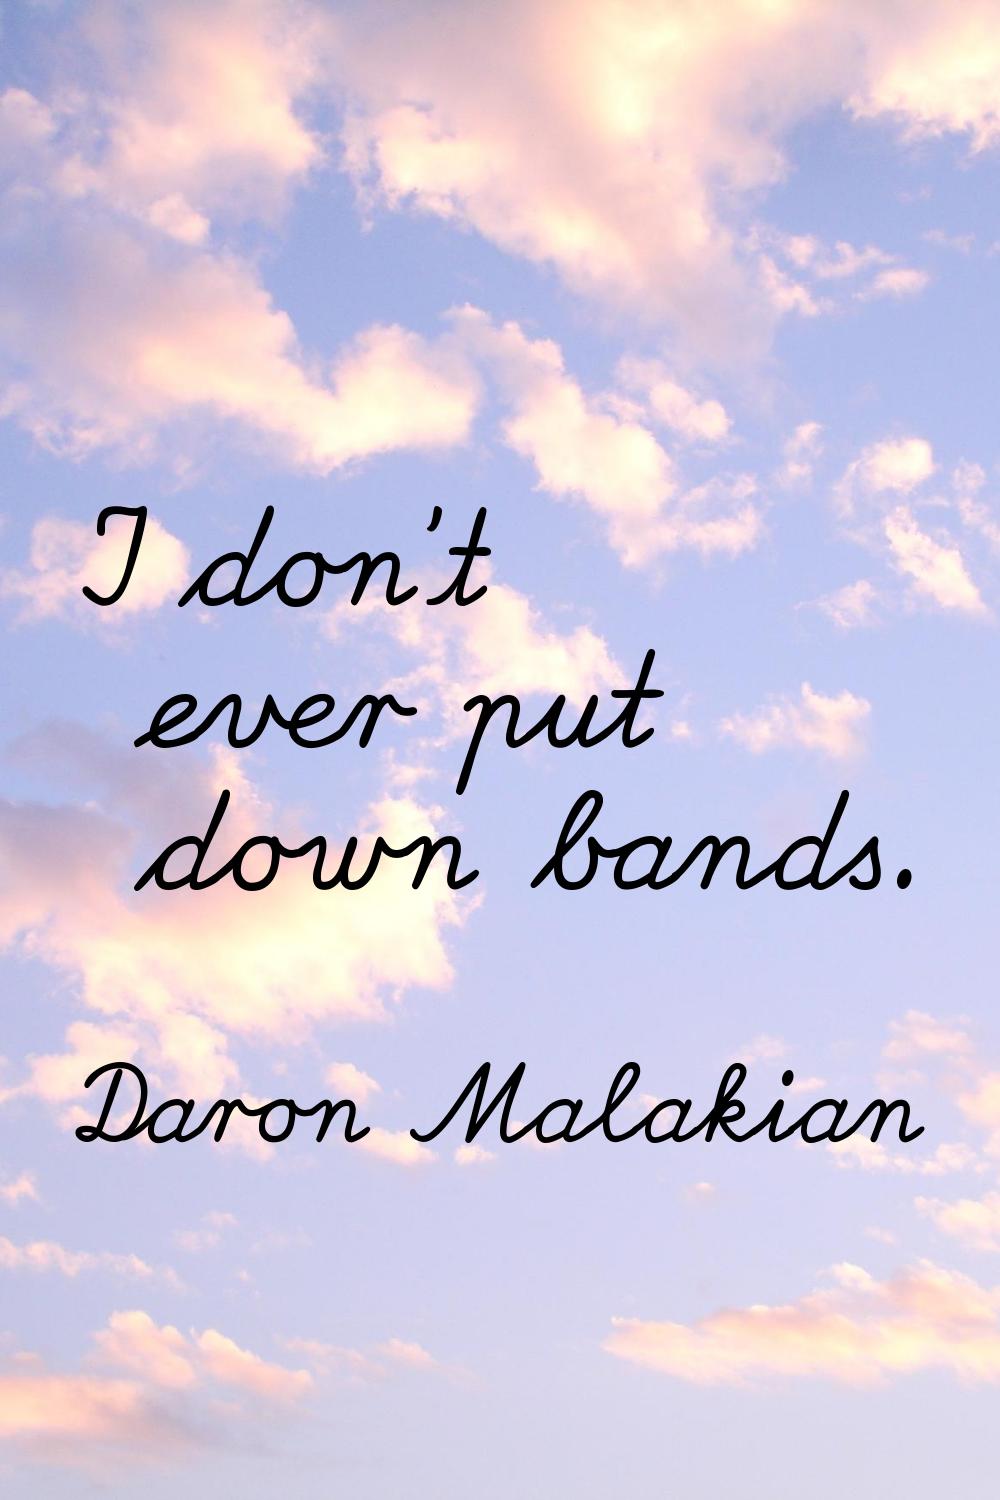 I don't ever put down bands.